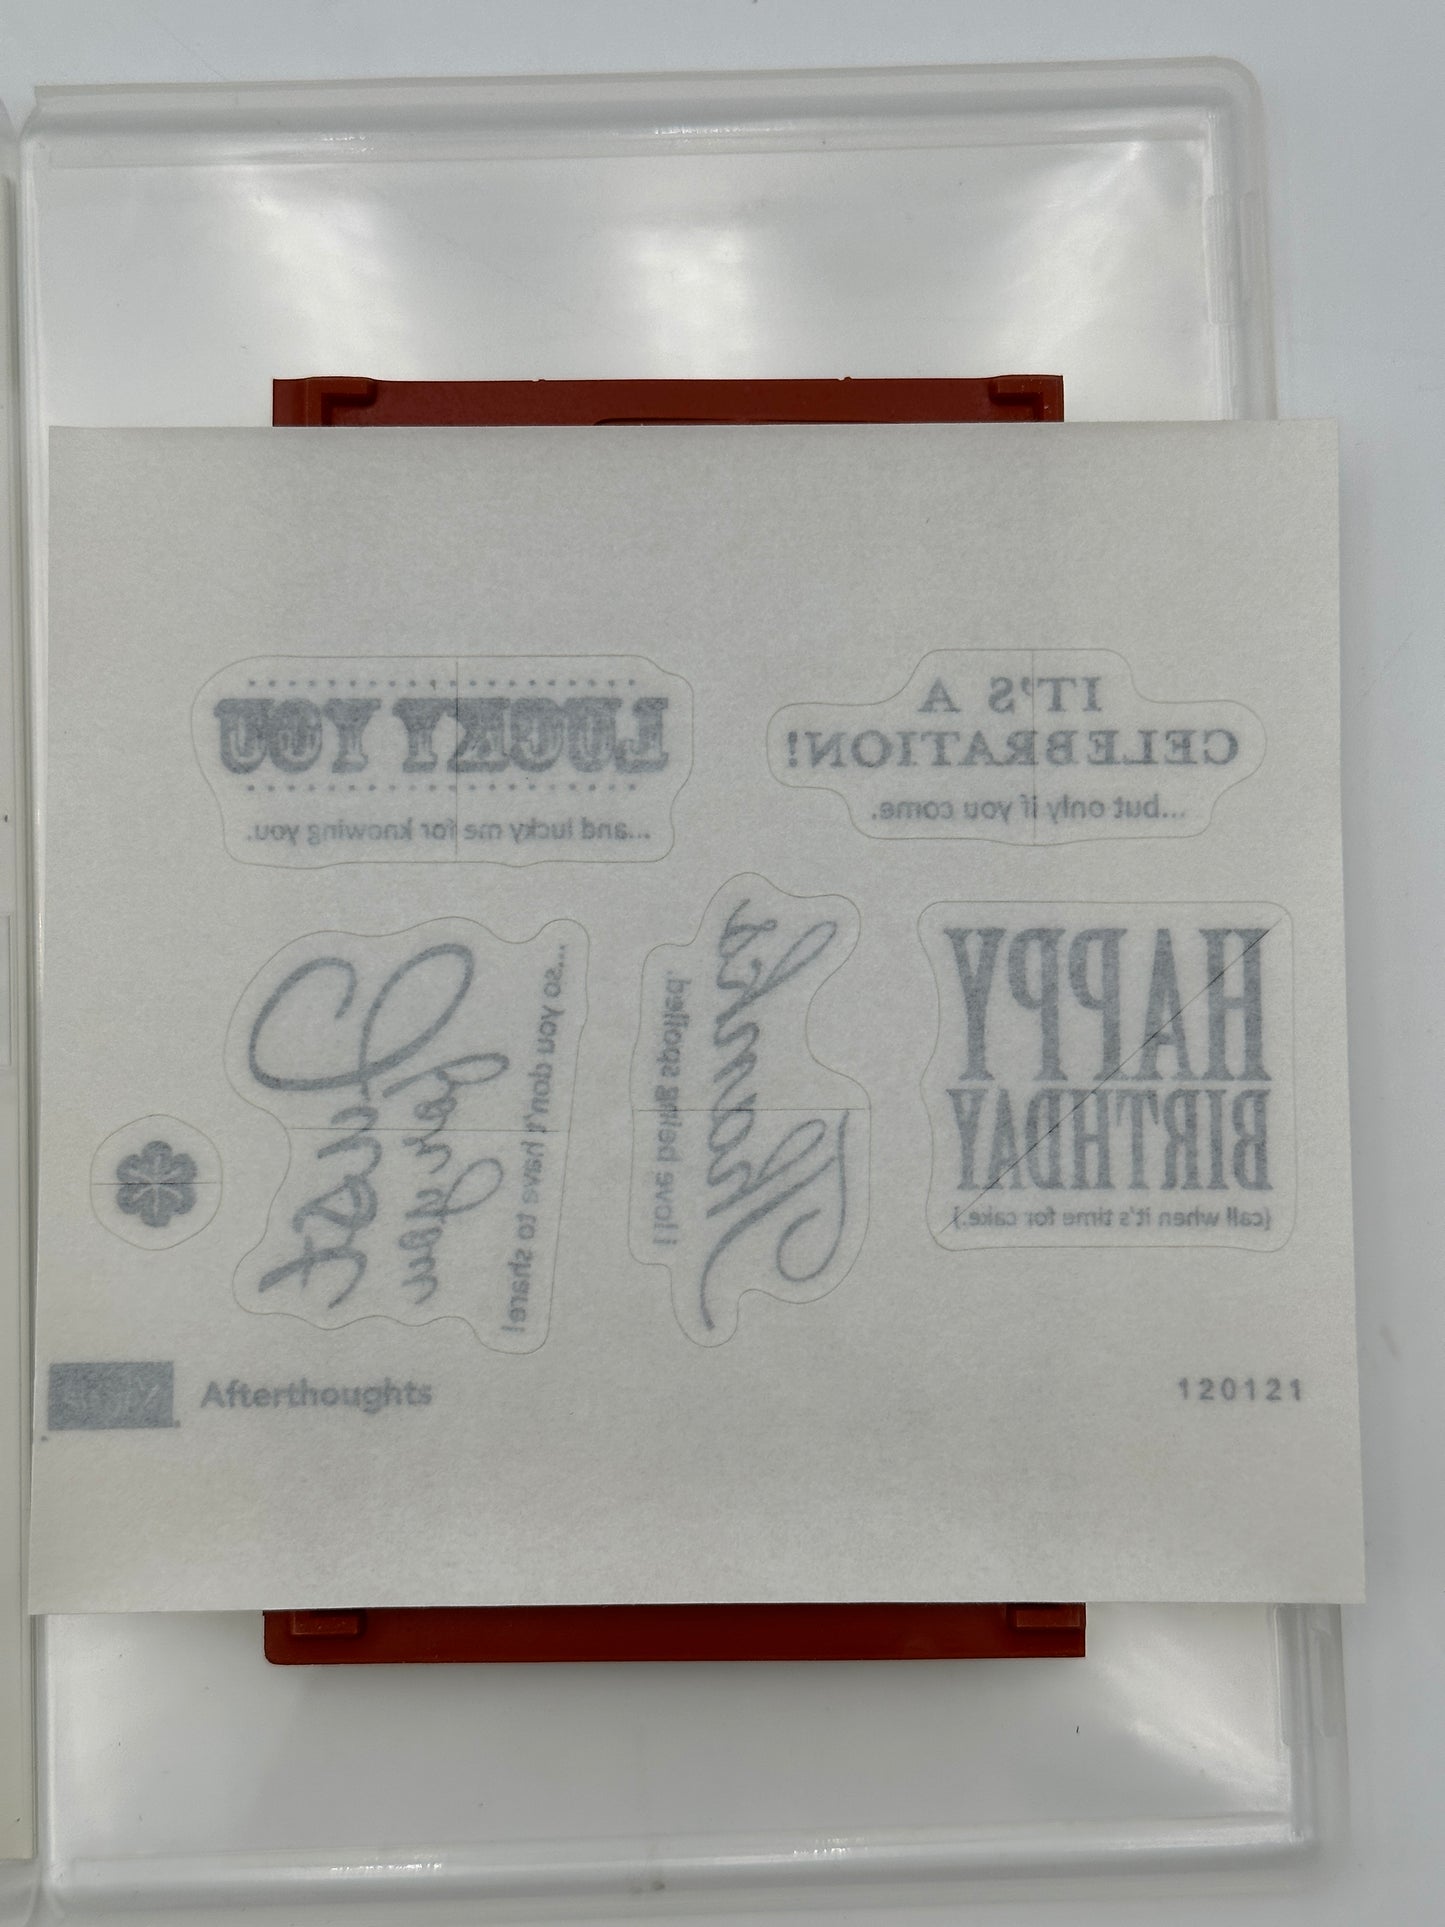 Stampin' Up! Afterthoughts Cling Stamp Set, never used - retired